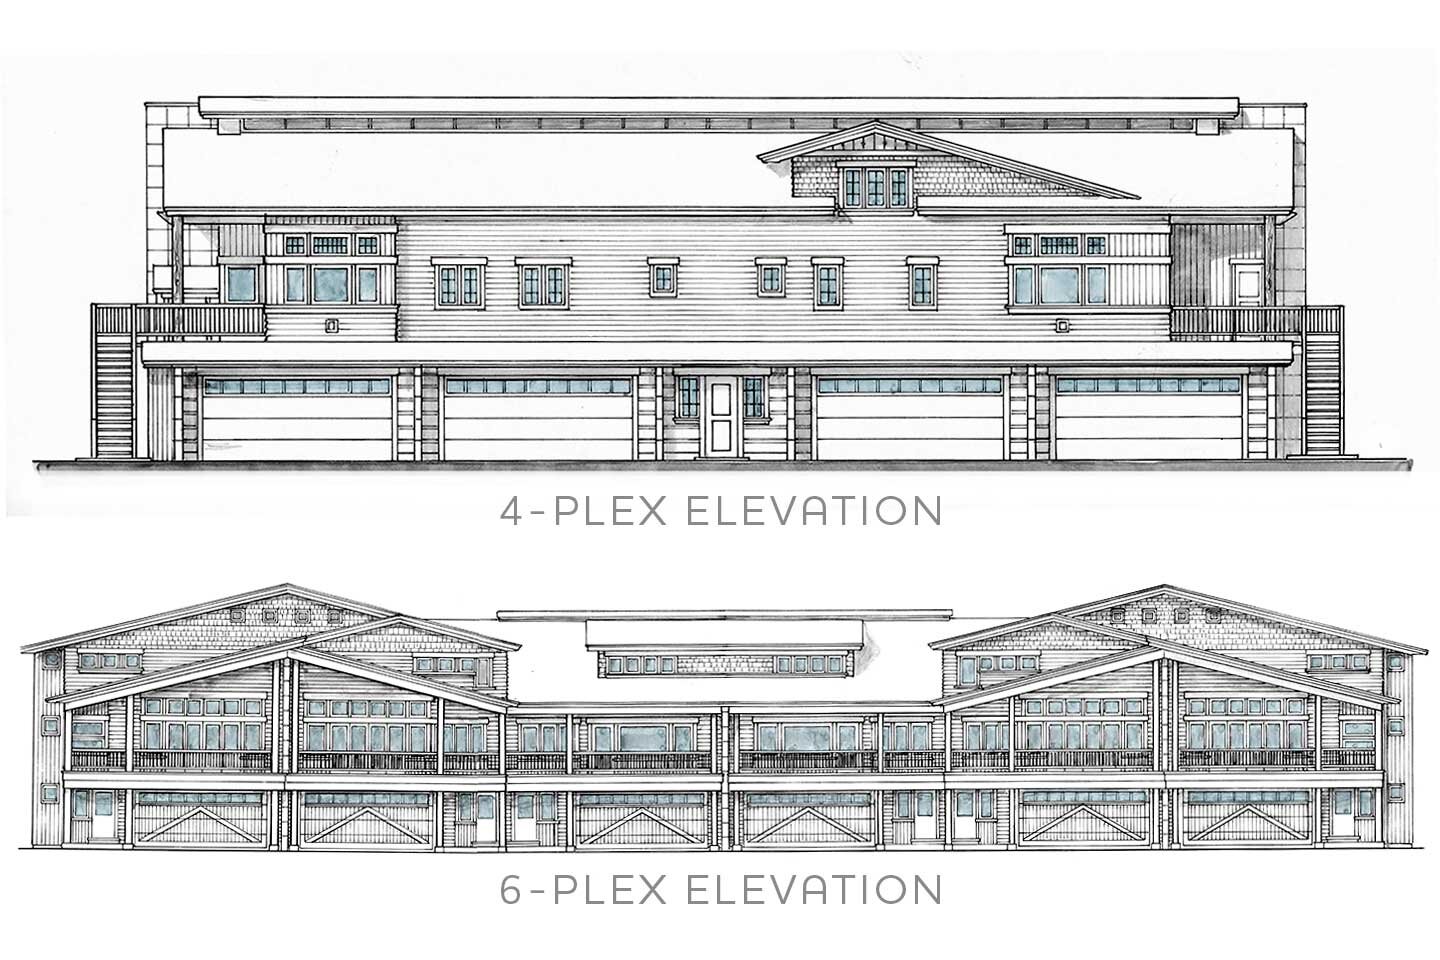 Two complexes elevation plans